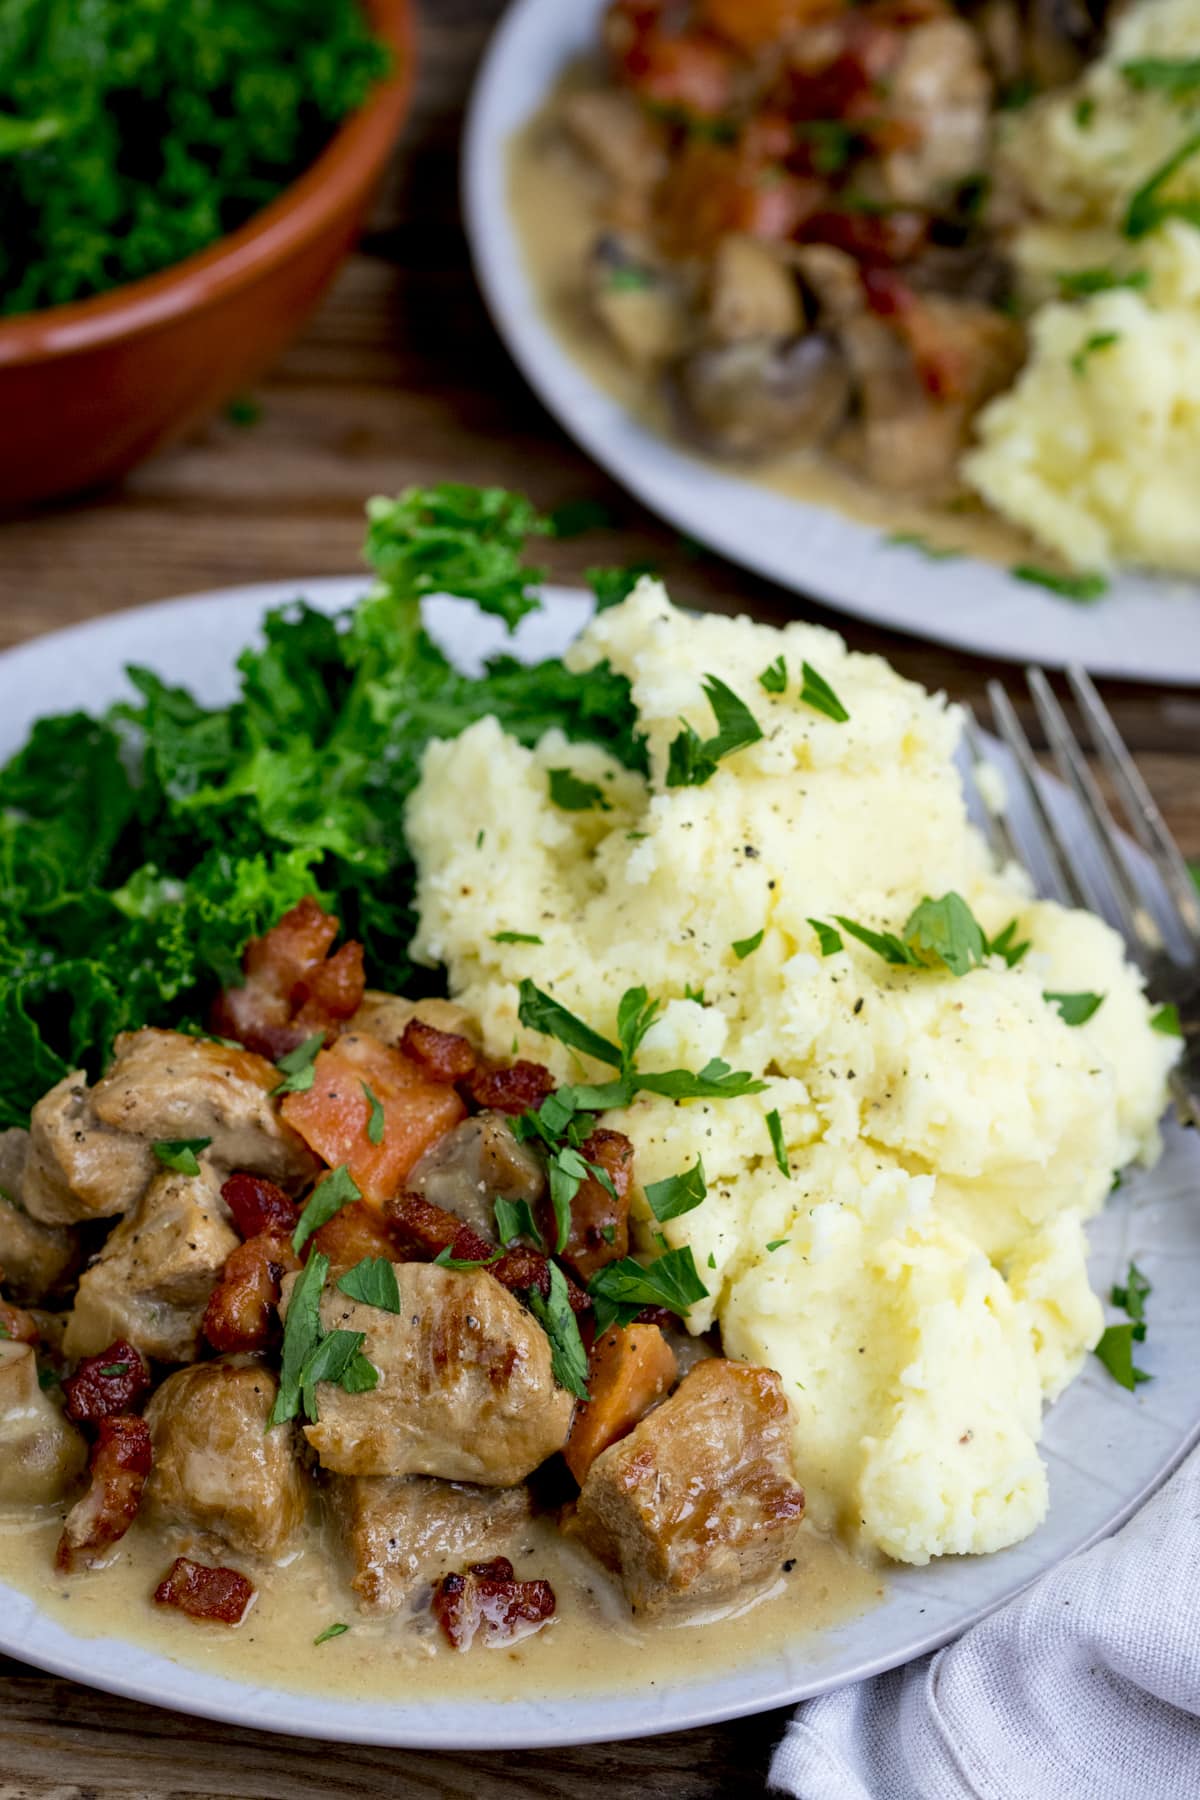 Creamy pork casserole, topped with bacon on a plate with mashed potato and kale. There is a further plate and a bowl of kale in the background.